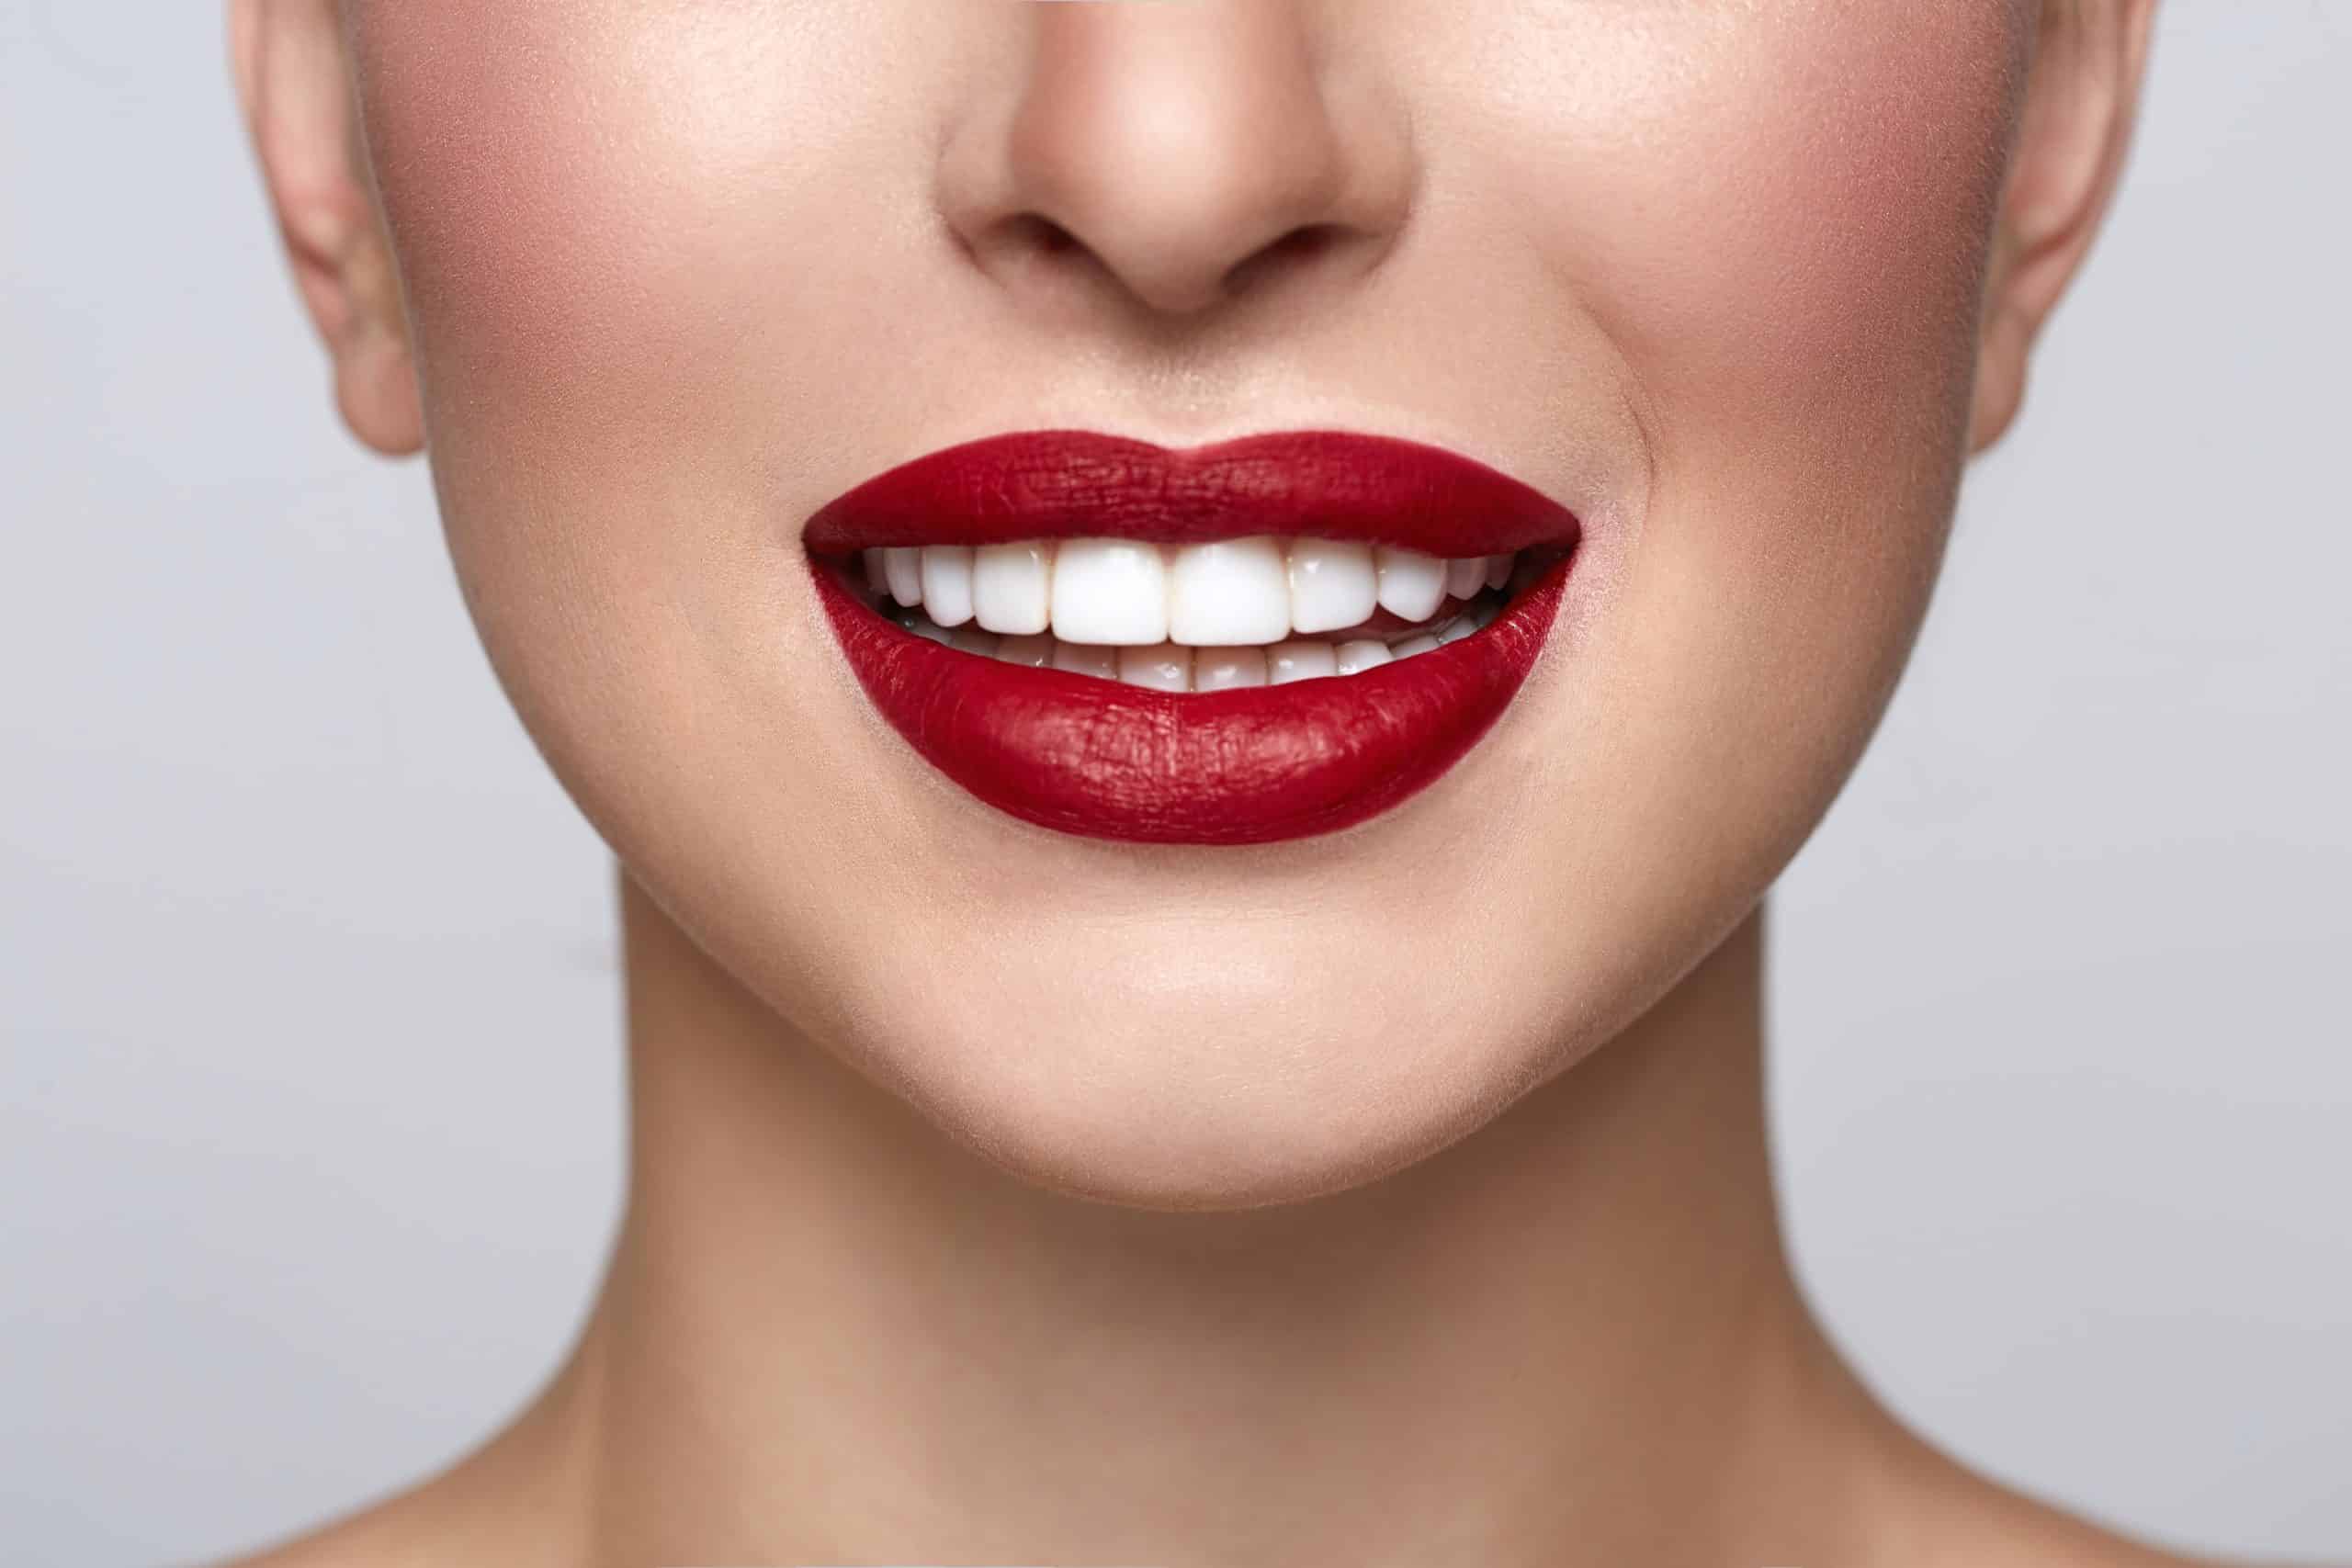 Lower half of a woman's smiling face with white teeth and red lipstick